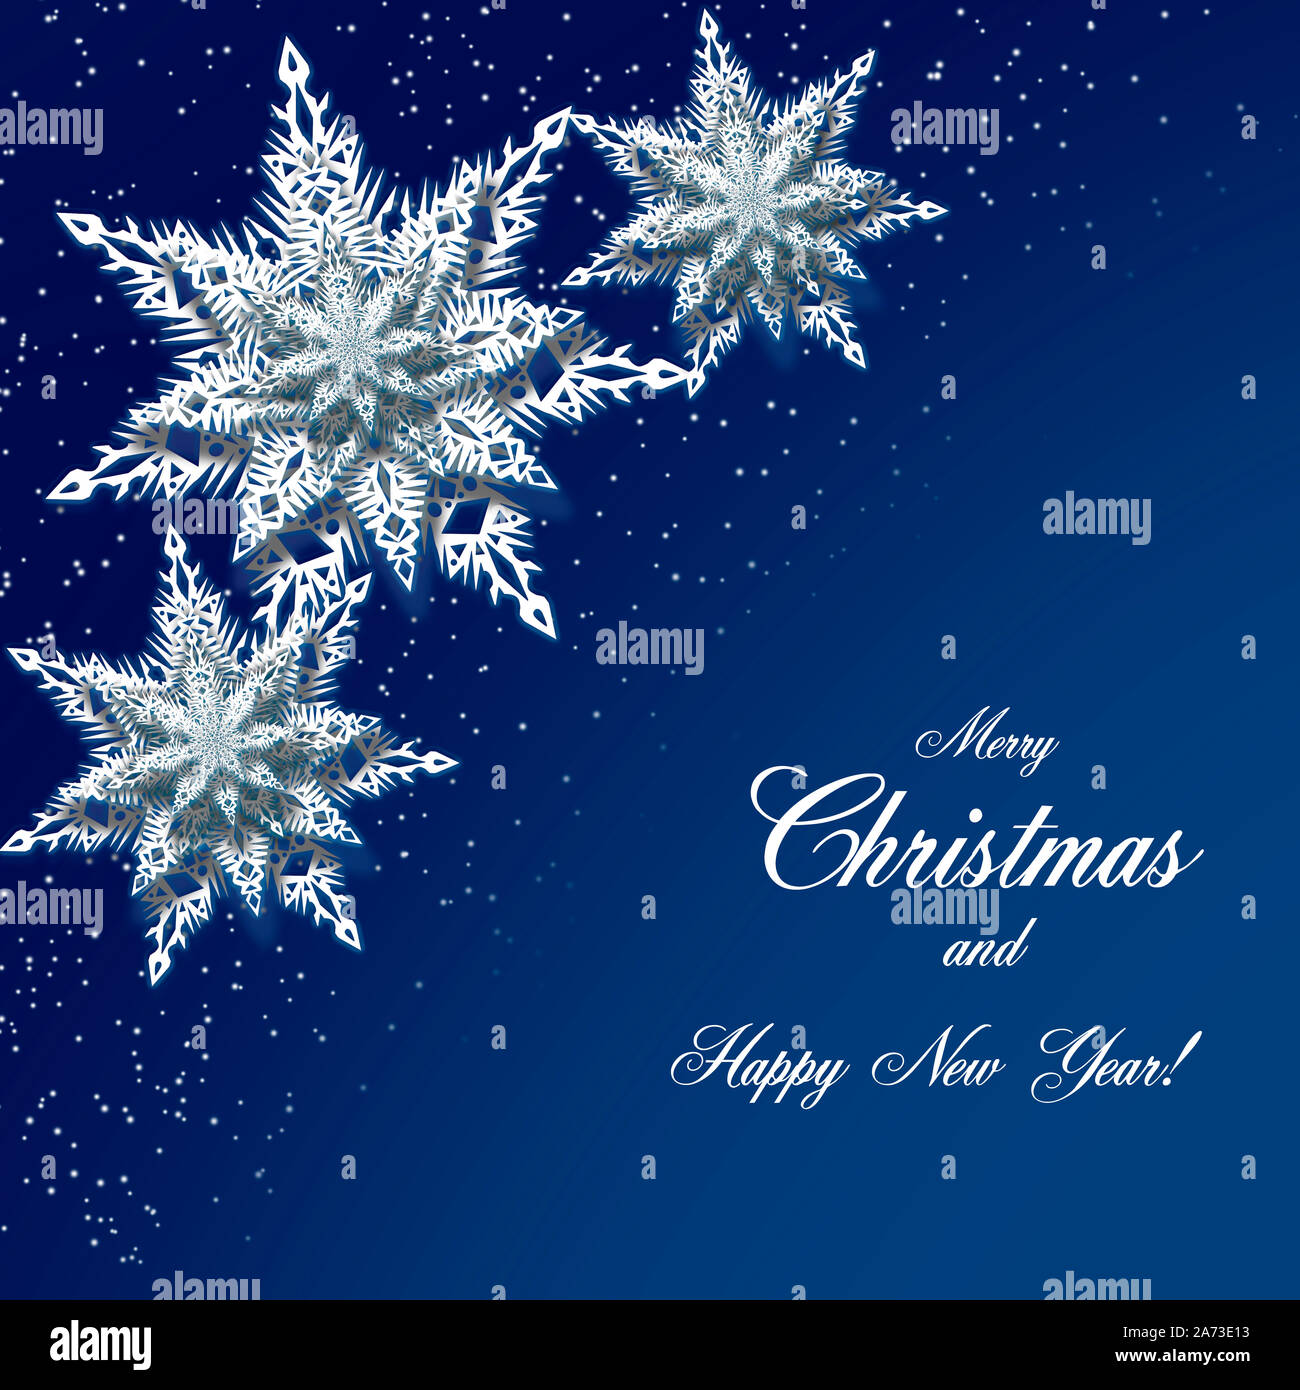 Marry Christmas and Happy New Year greeting card with white paper snowflakes on blue background. Merry Christmas party invitation template. Origami pa Stock Photo